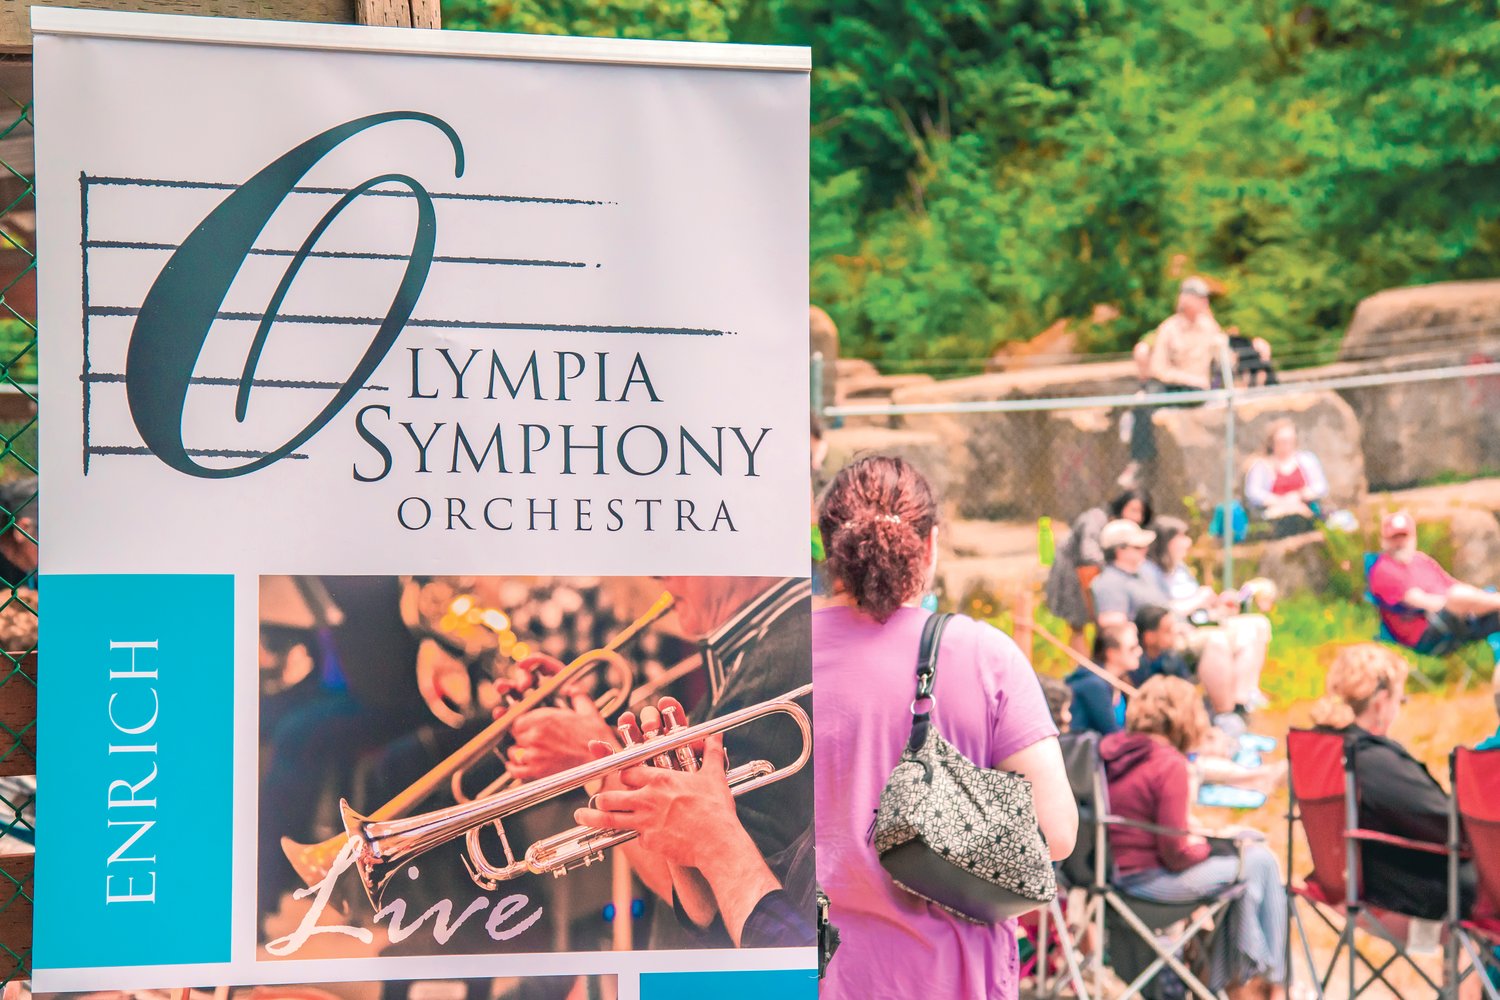 Attendees gather to listen as the Olympia Symphony Orchestra performs outside at the Tenino Quarry Pool on Sunday.